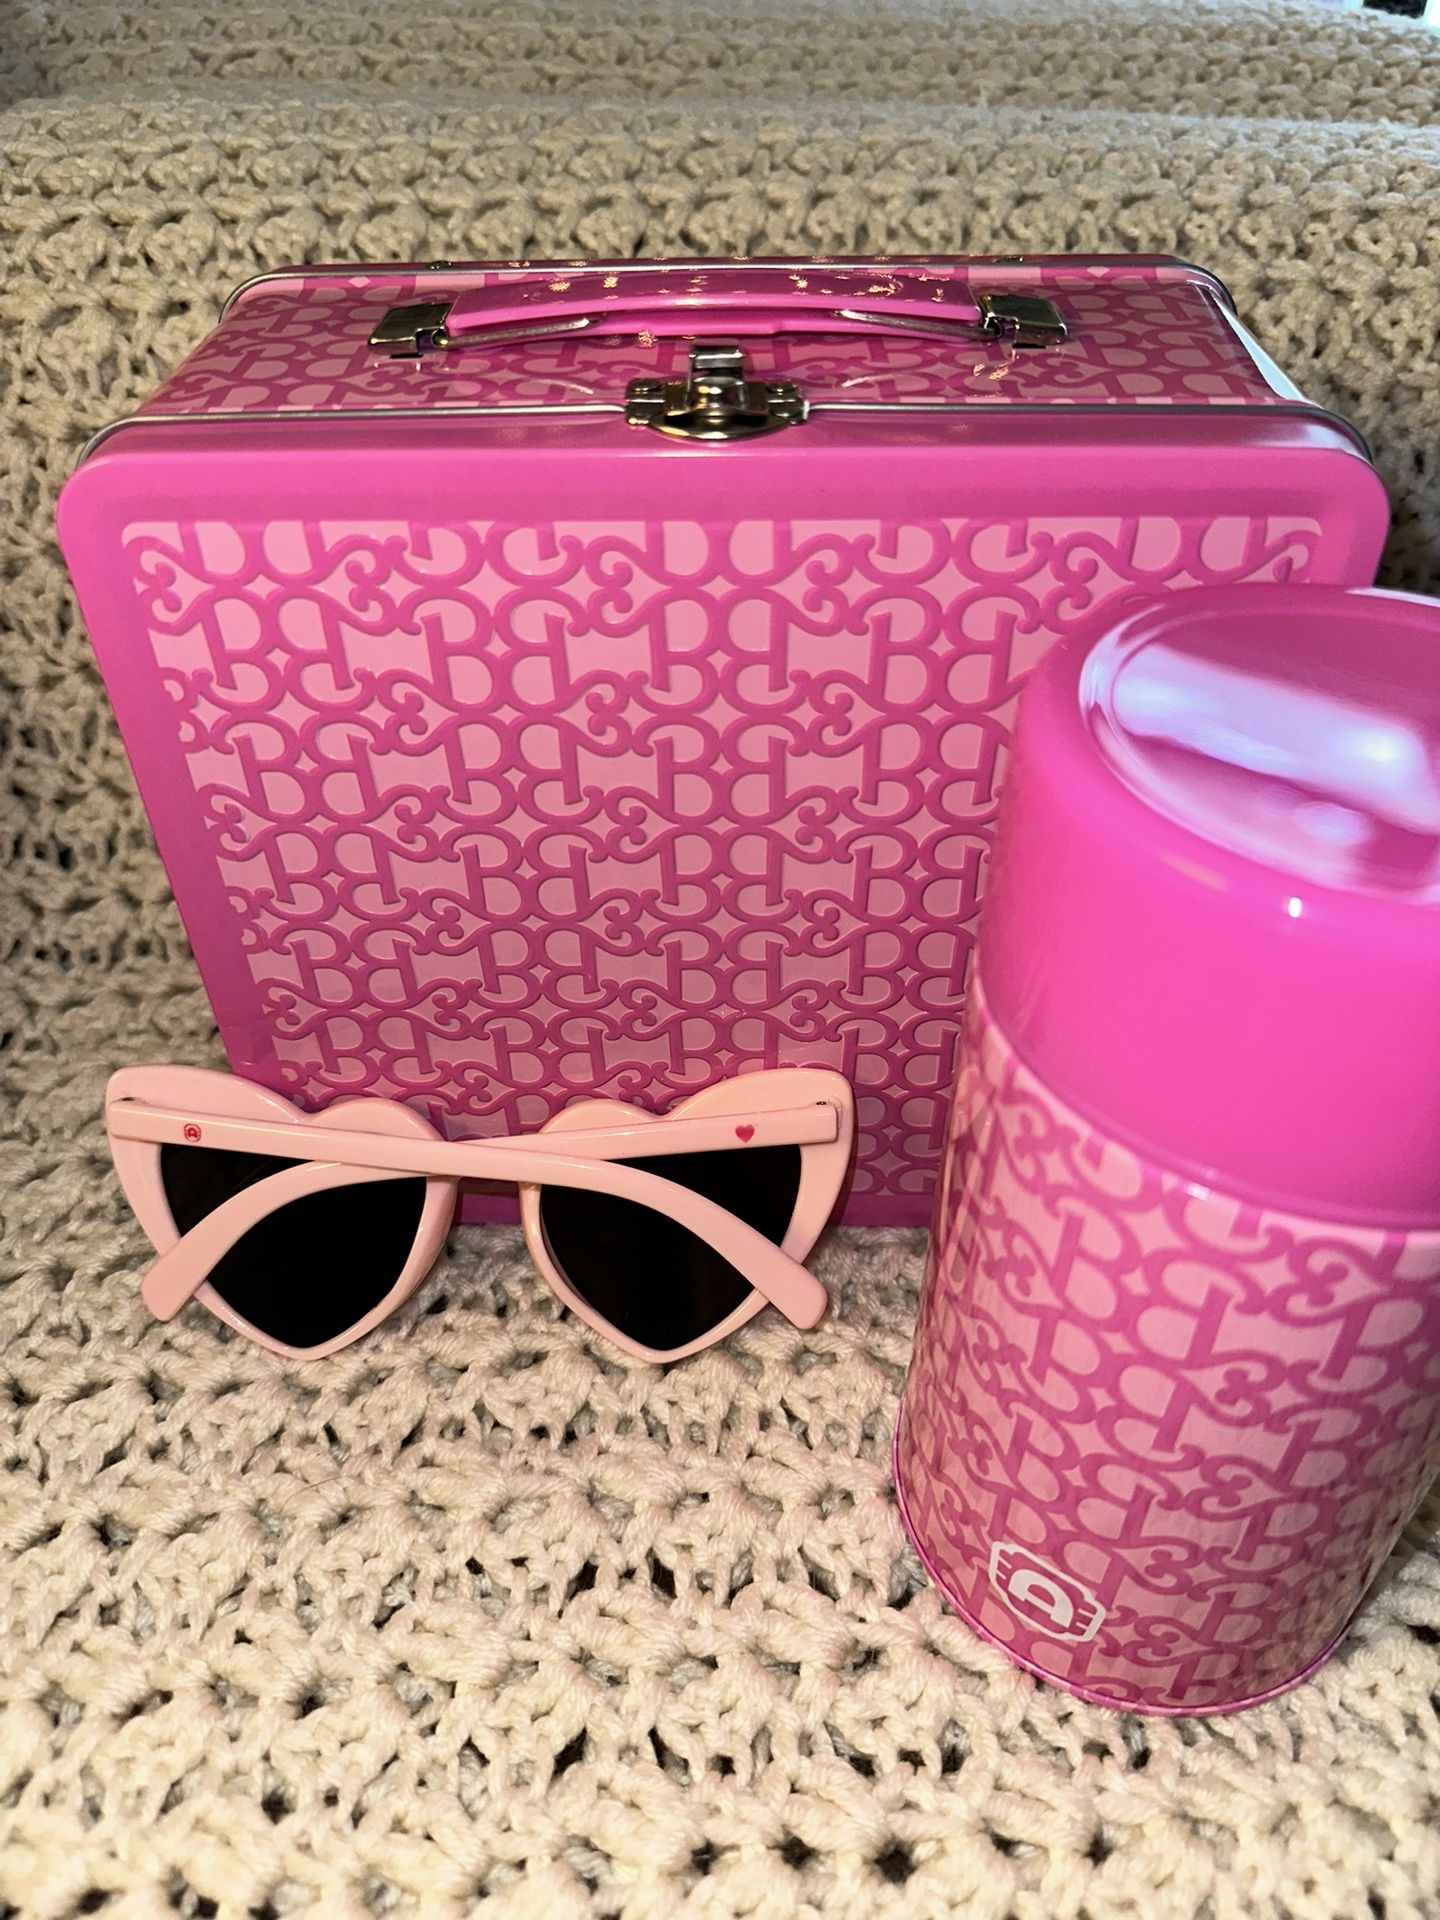 Barbie Movie Alamo Drafthouse Exclusive Lunchbox/Thermos Set And Sunglasses 